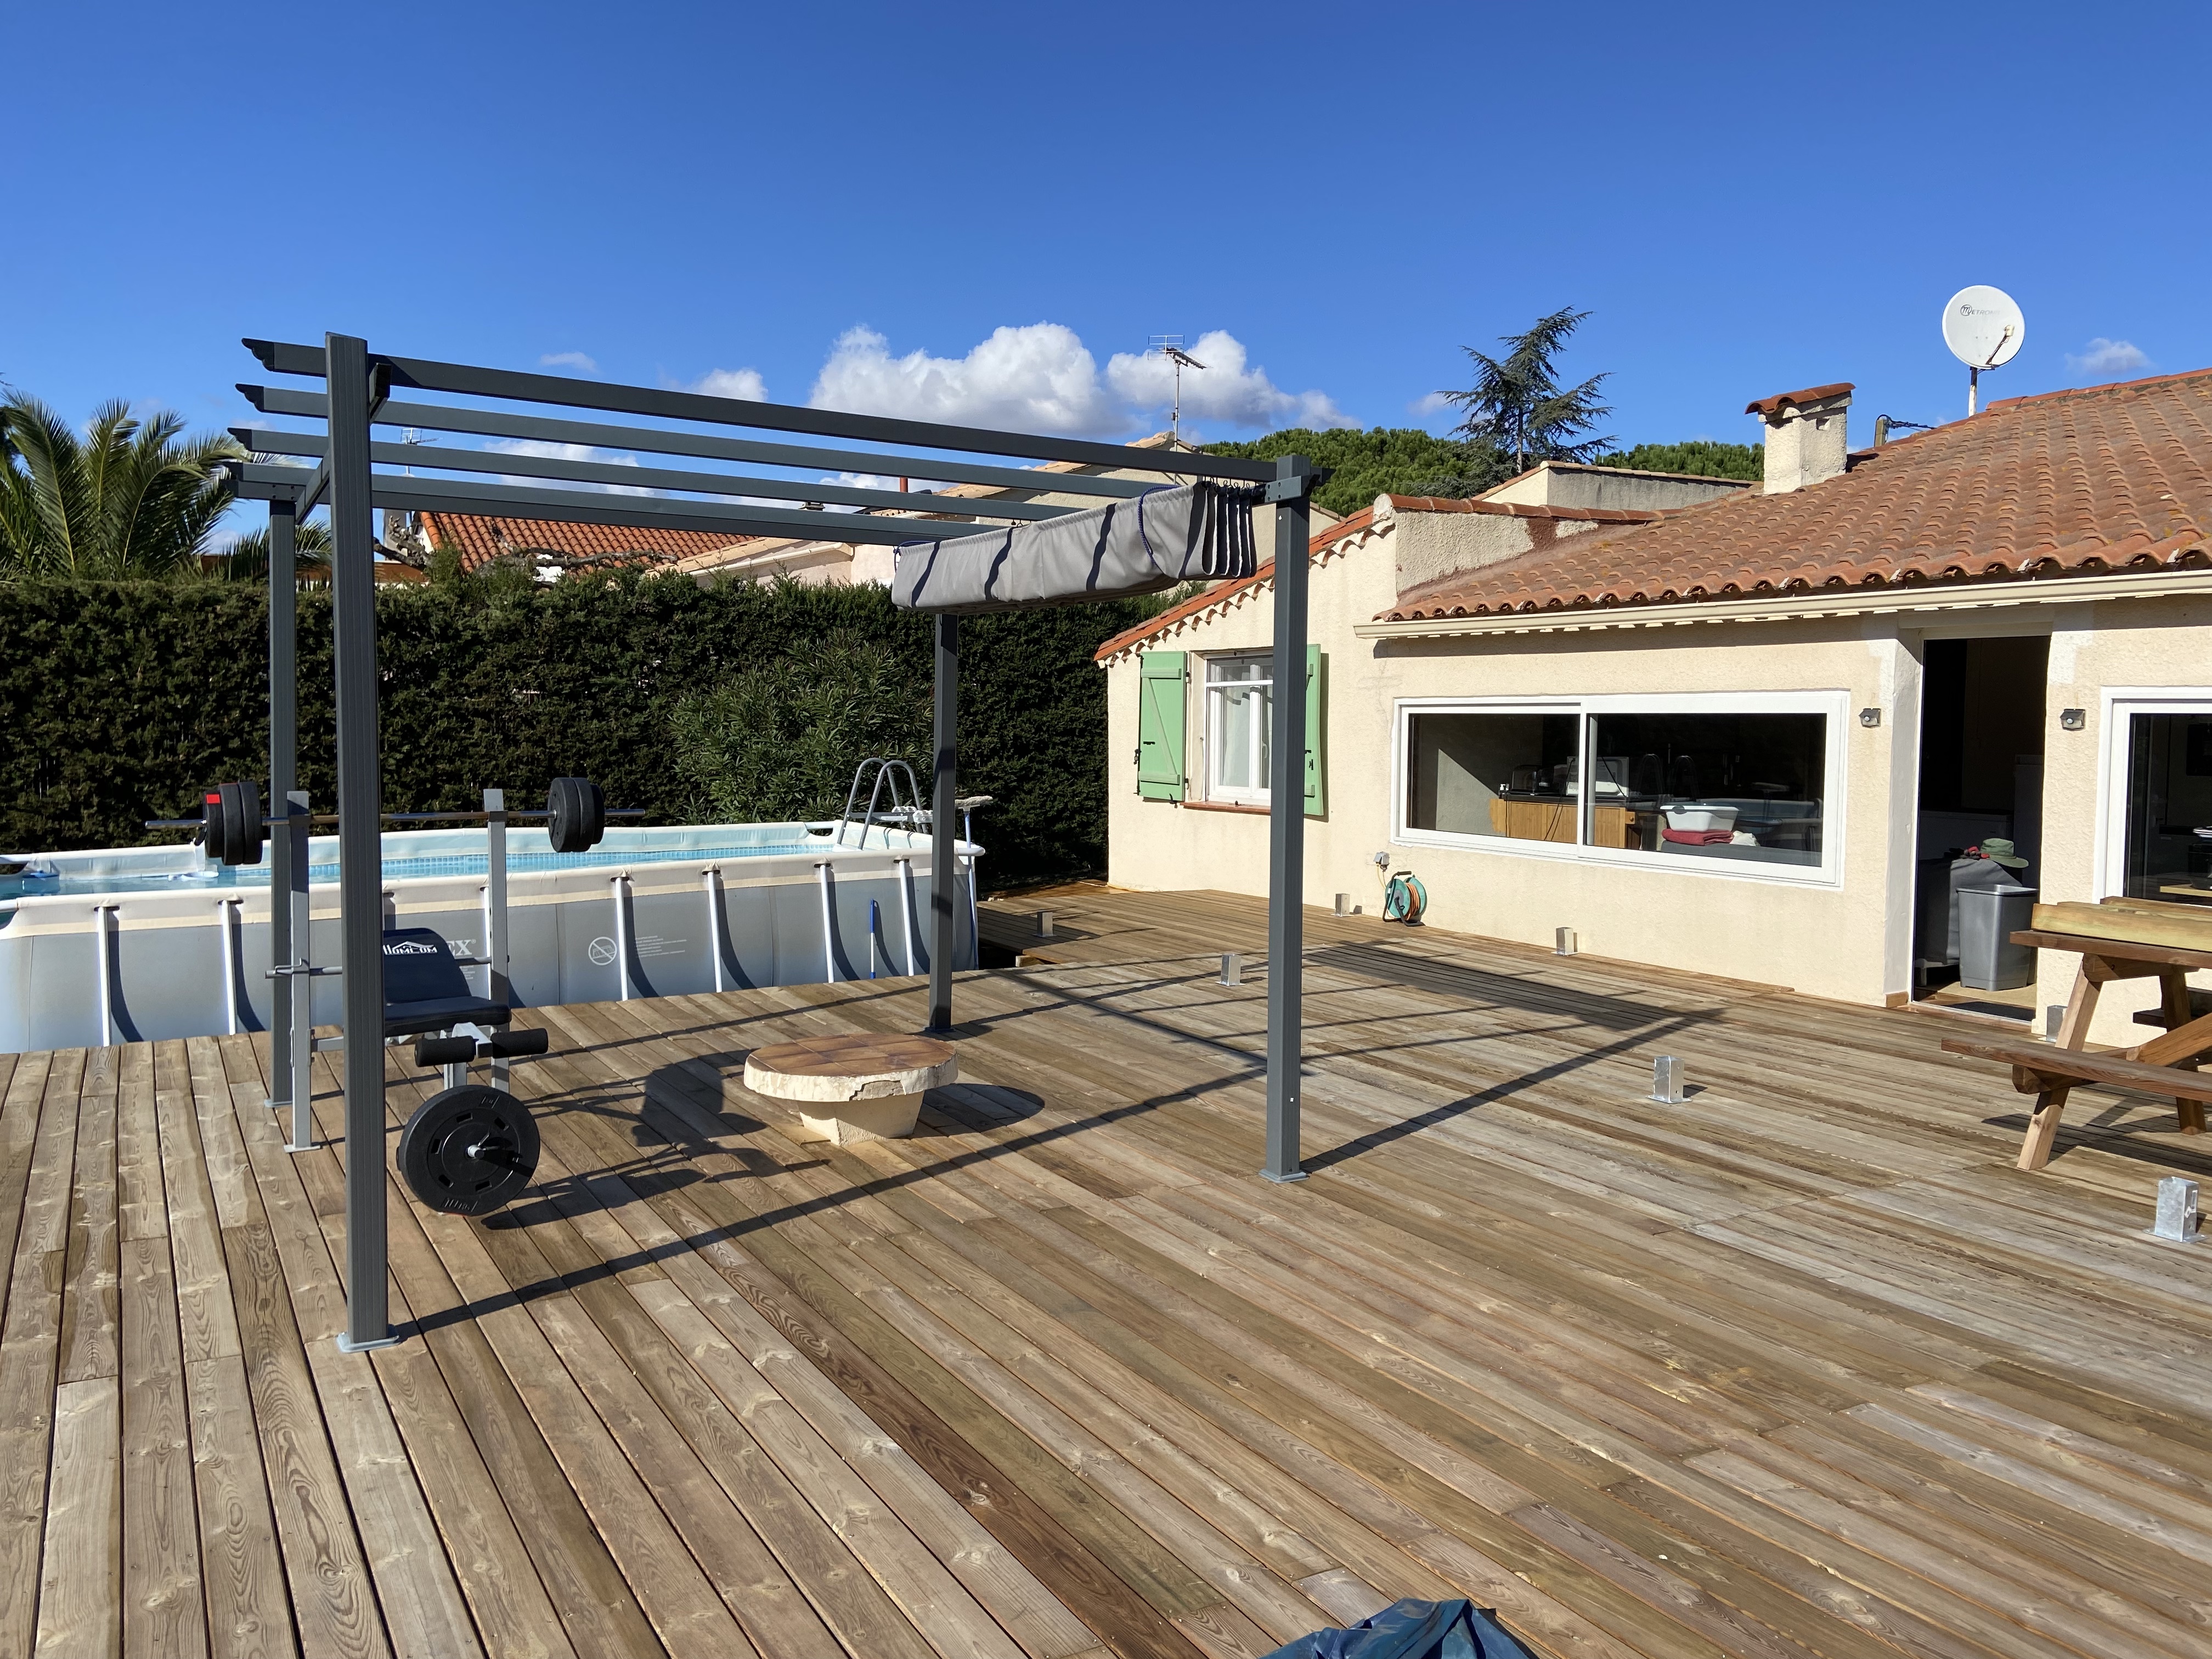 We completed the second 10m by 4m decking section and a 3m by 3m decking section in front of the pool.